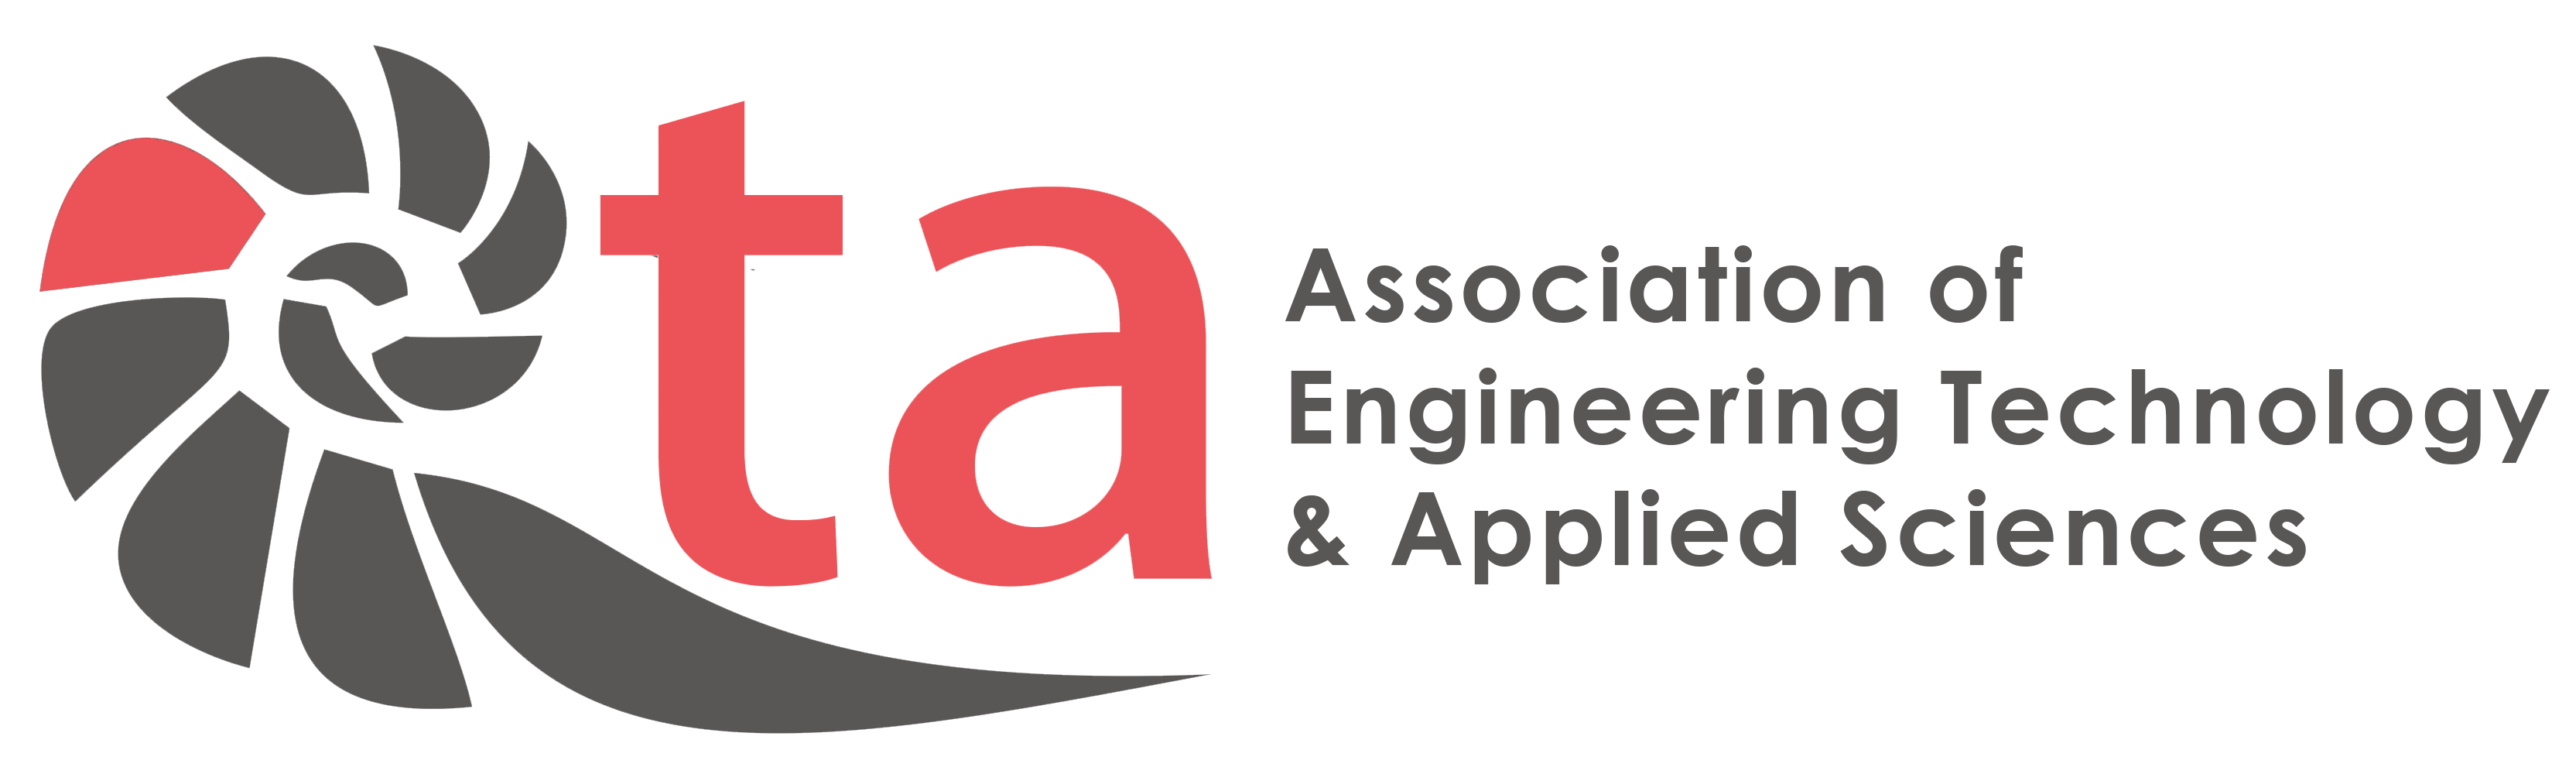 AETA International Conference on Emerging Research in Information Technology, Applied Sciences, Engineering & Computing  (EIAE)